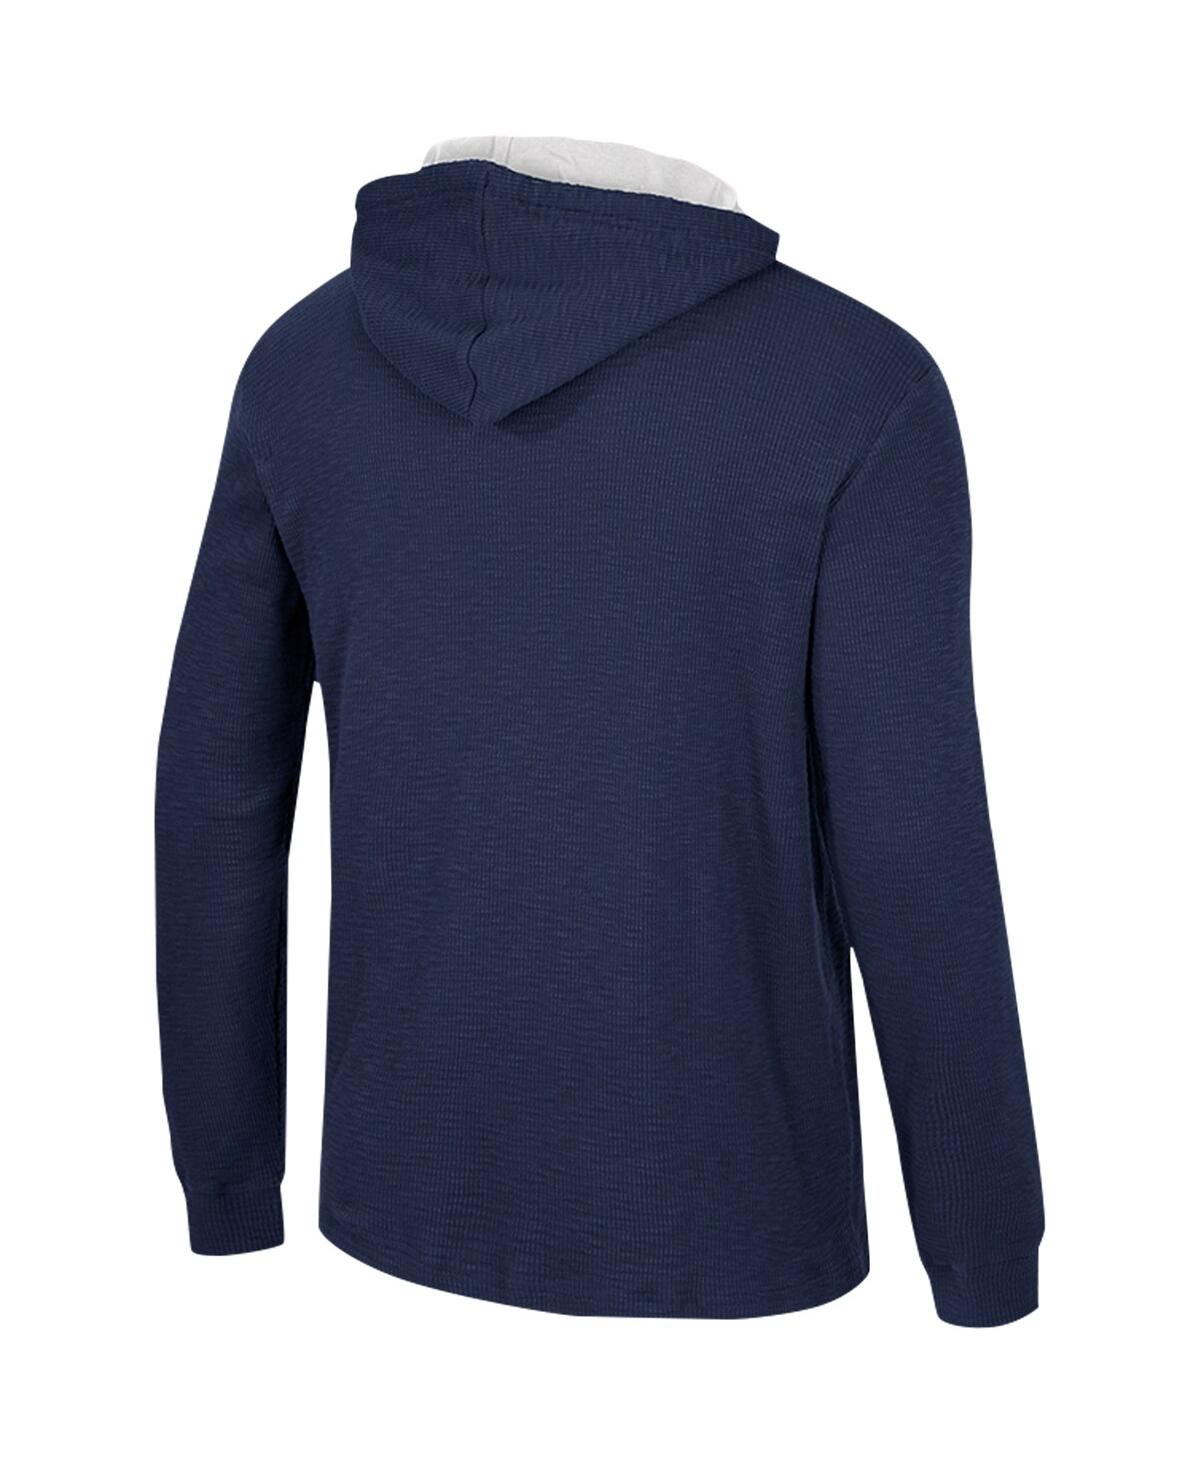 Shop Colosseum Men's  Navy Penn State Nittany Lions Affirmative Thermal Hoodie Long Sleeve T-shirt